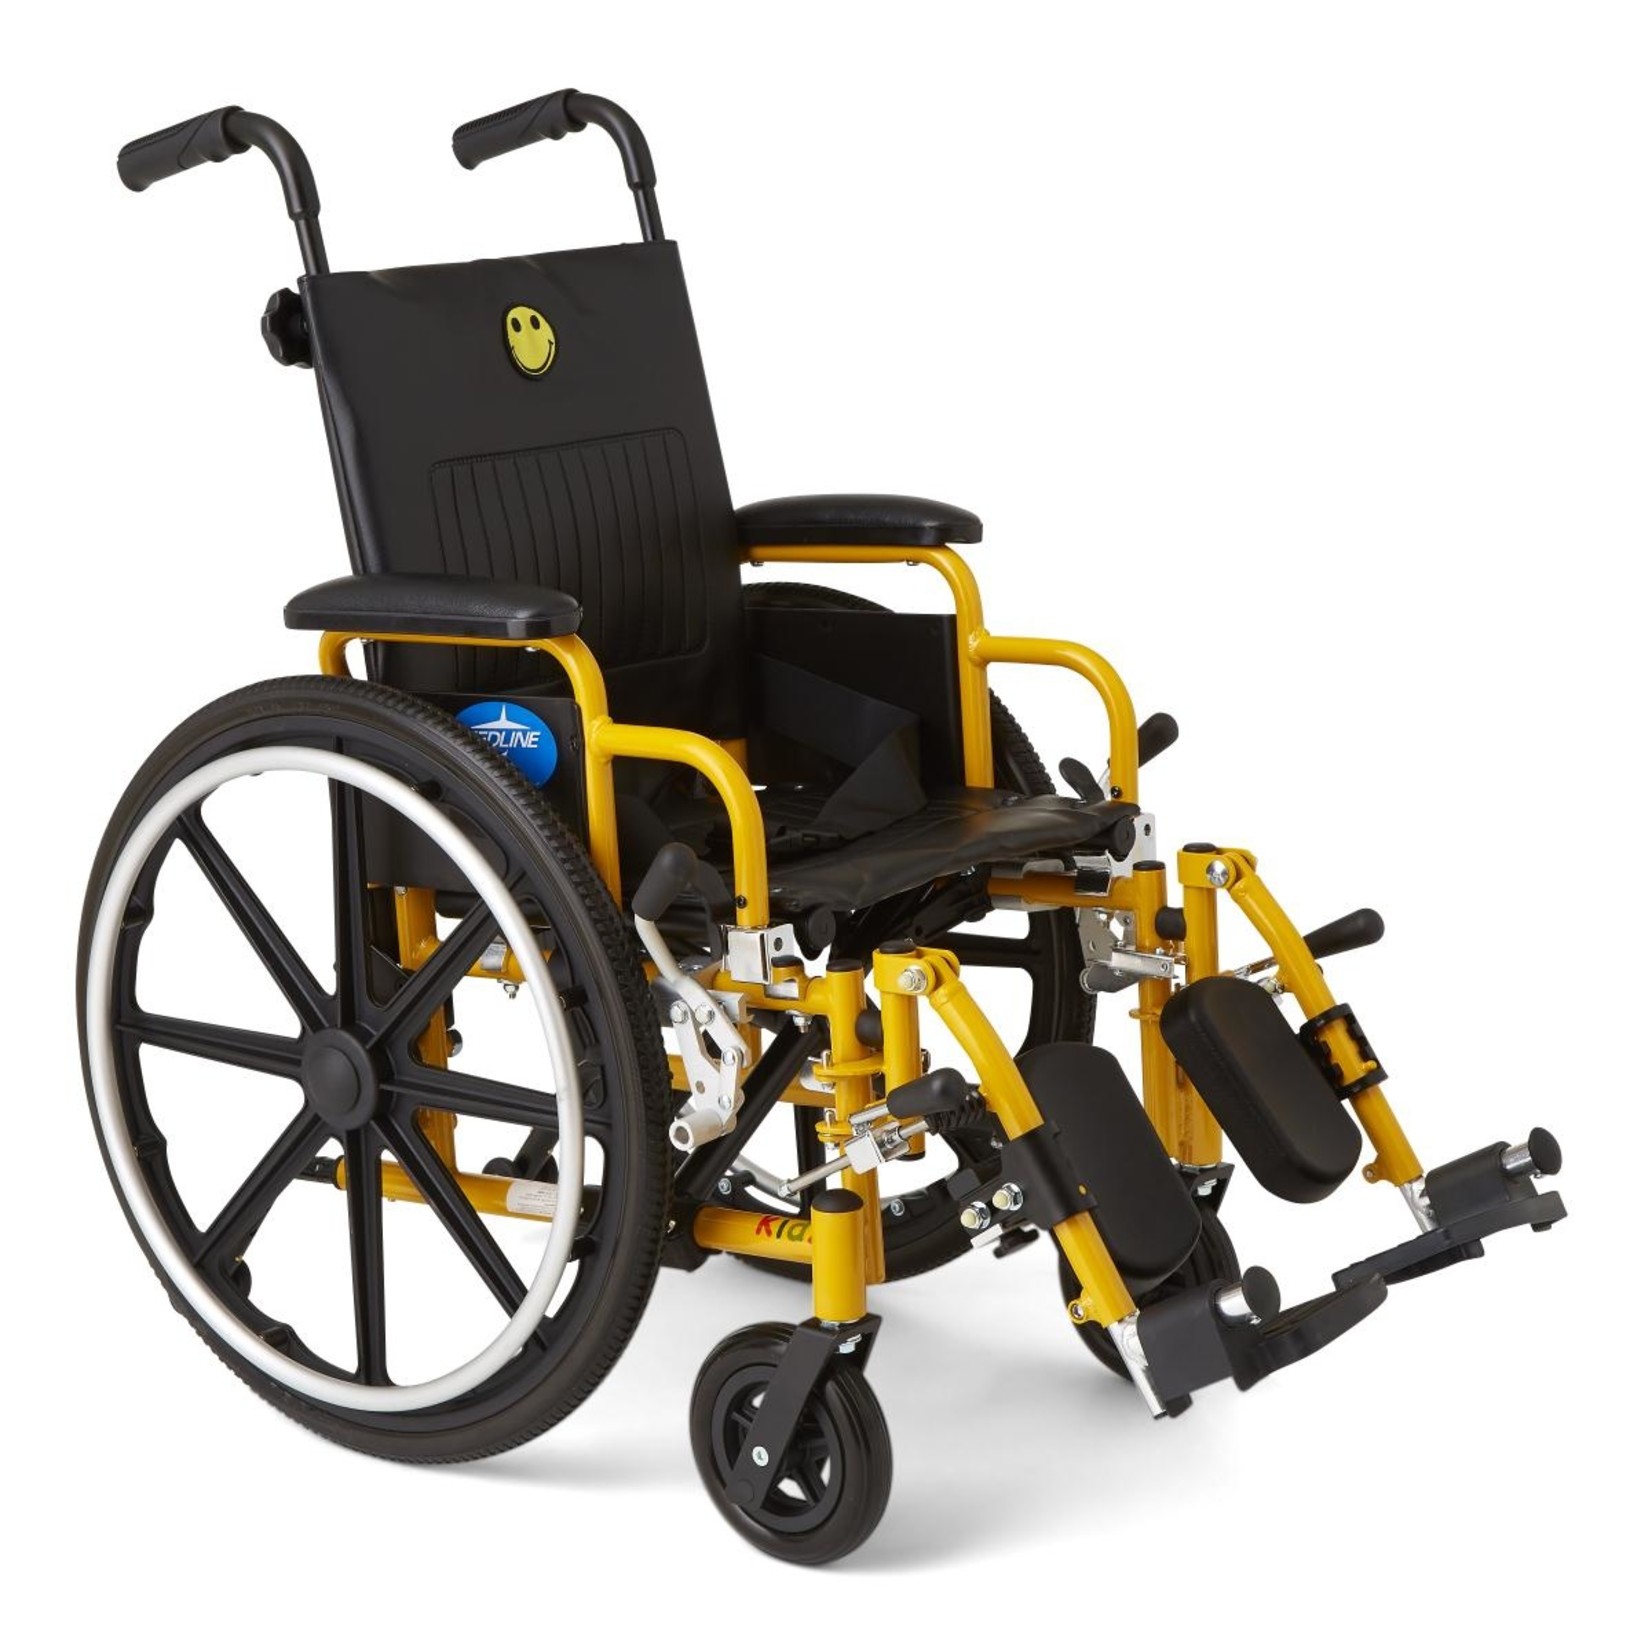 Medline Pediatric Wheelchair with 14” seat Elevating Leg Rests